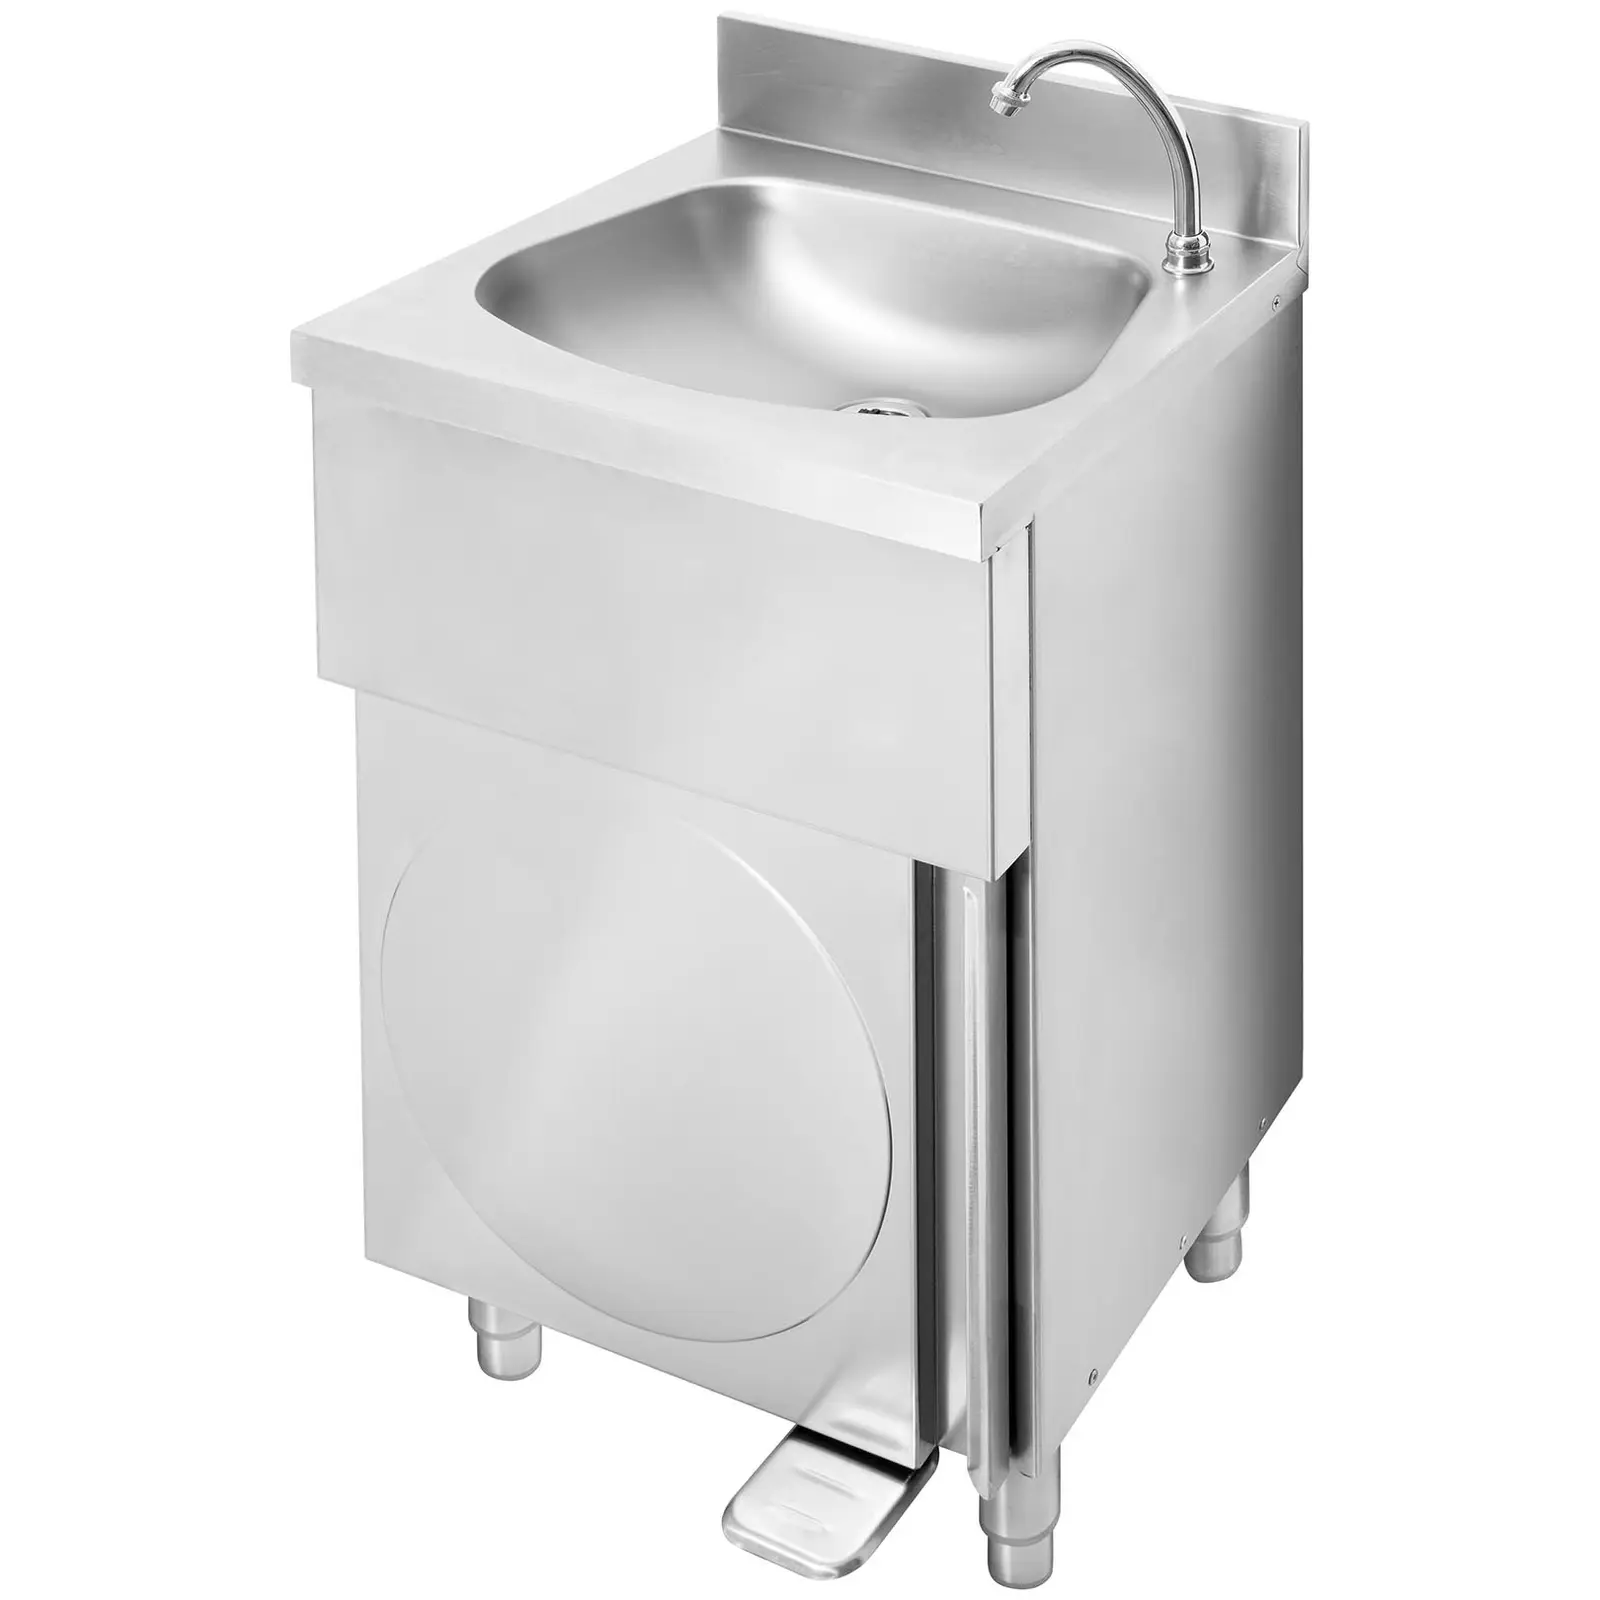 Foot-operated hand wash basin - freestanding - incl. tap - stainless steel/chromed brass - tap length 140 mm